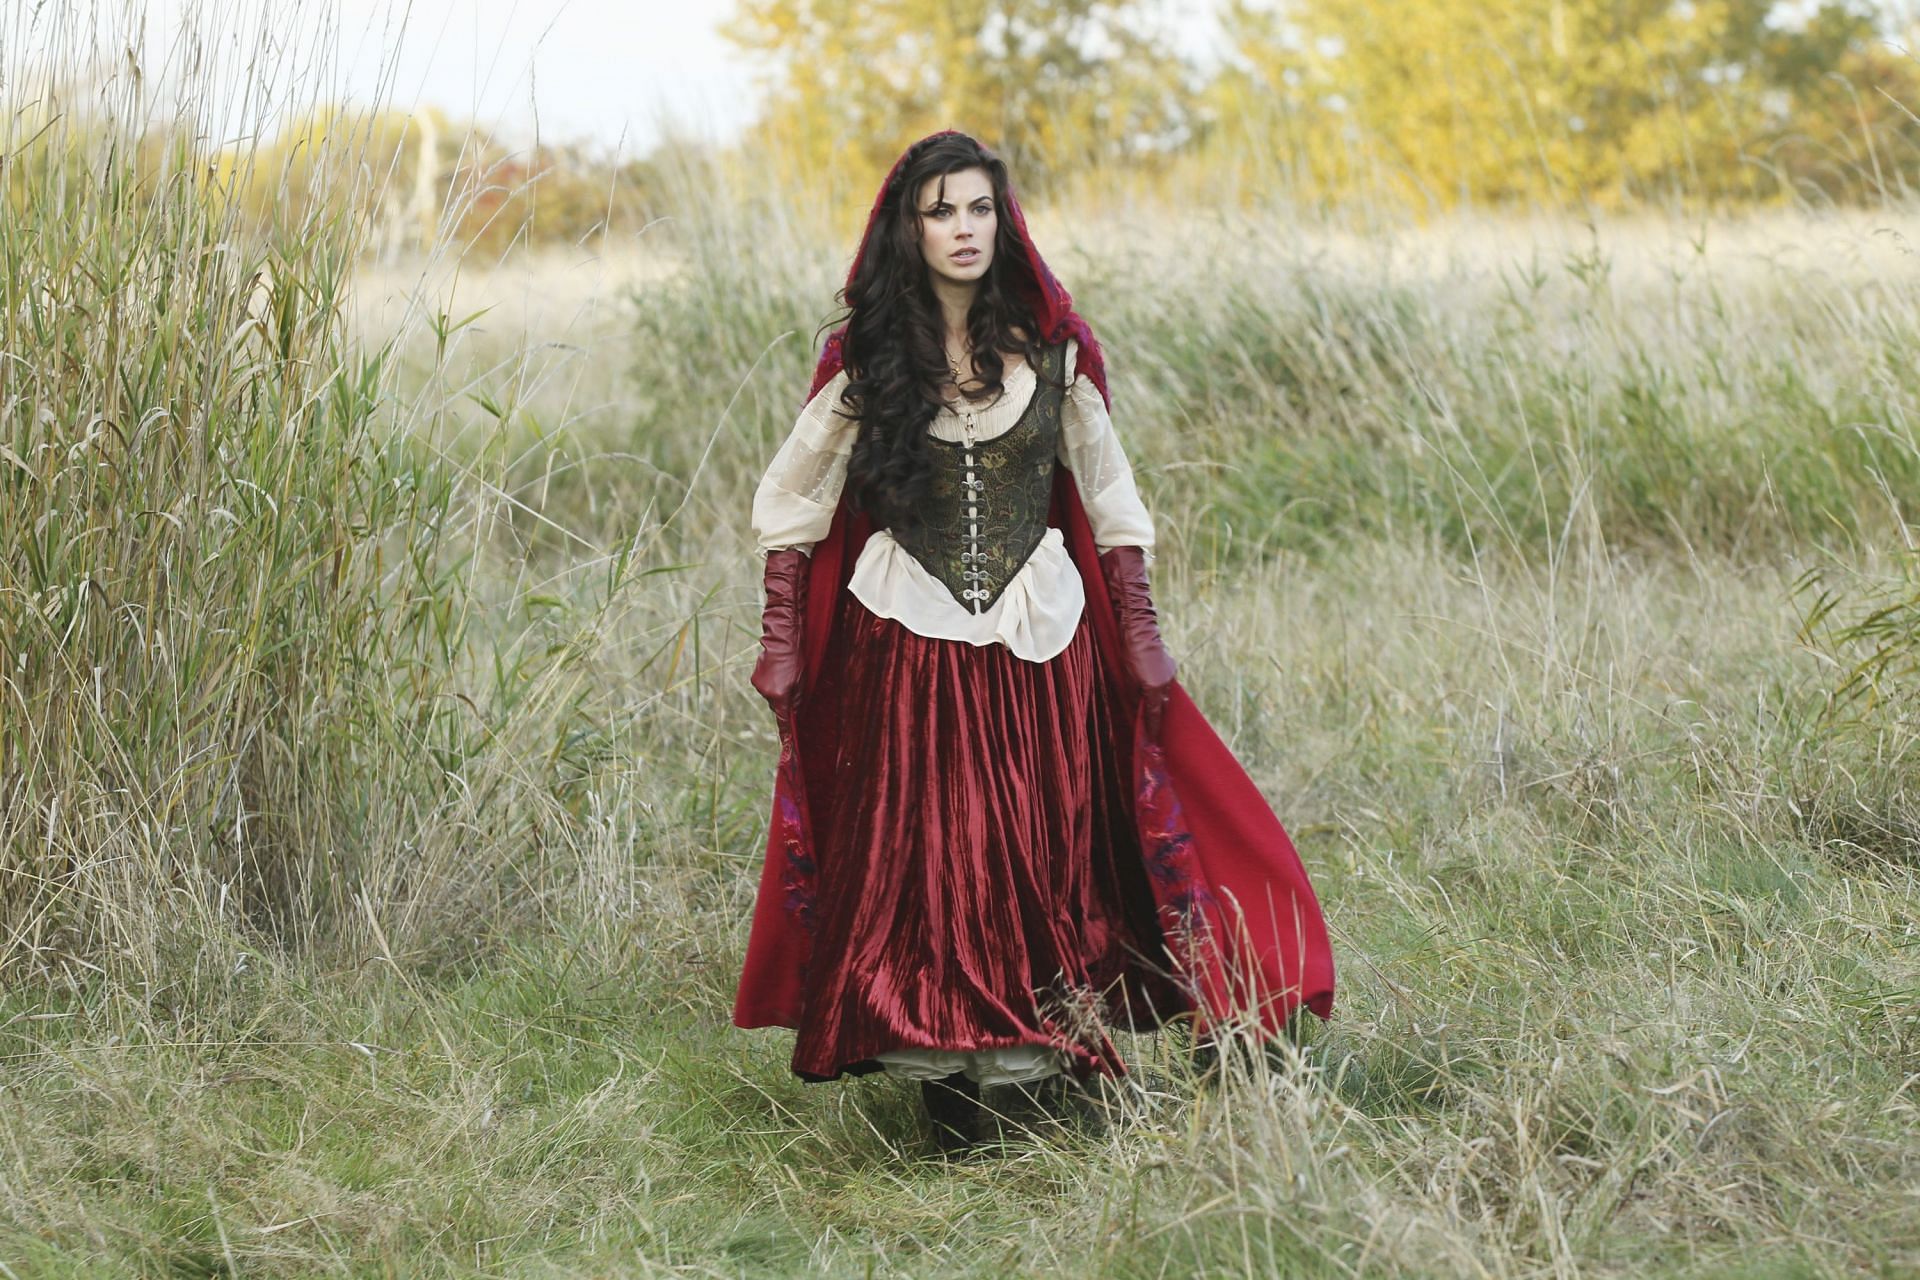 Meghan Ory as Red Riding Hood in Once Upon a Time (Image via ABC)